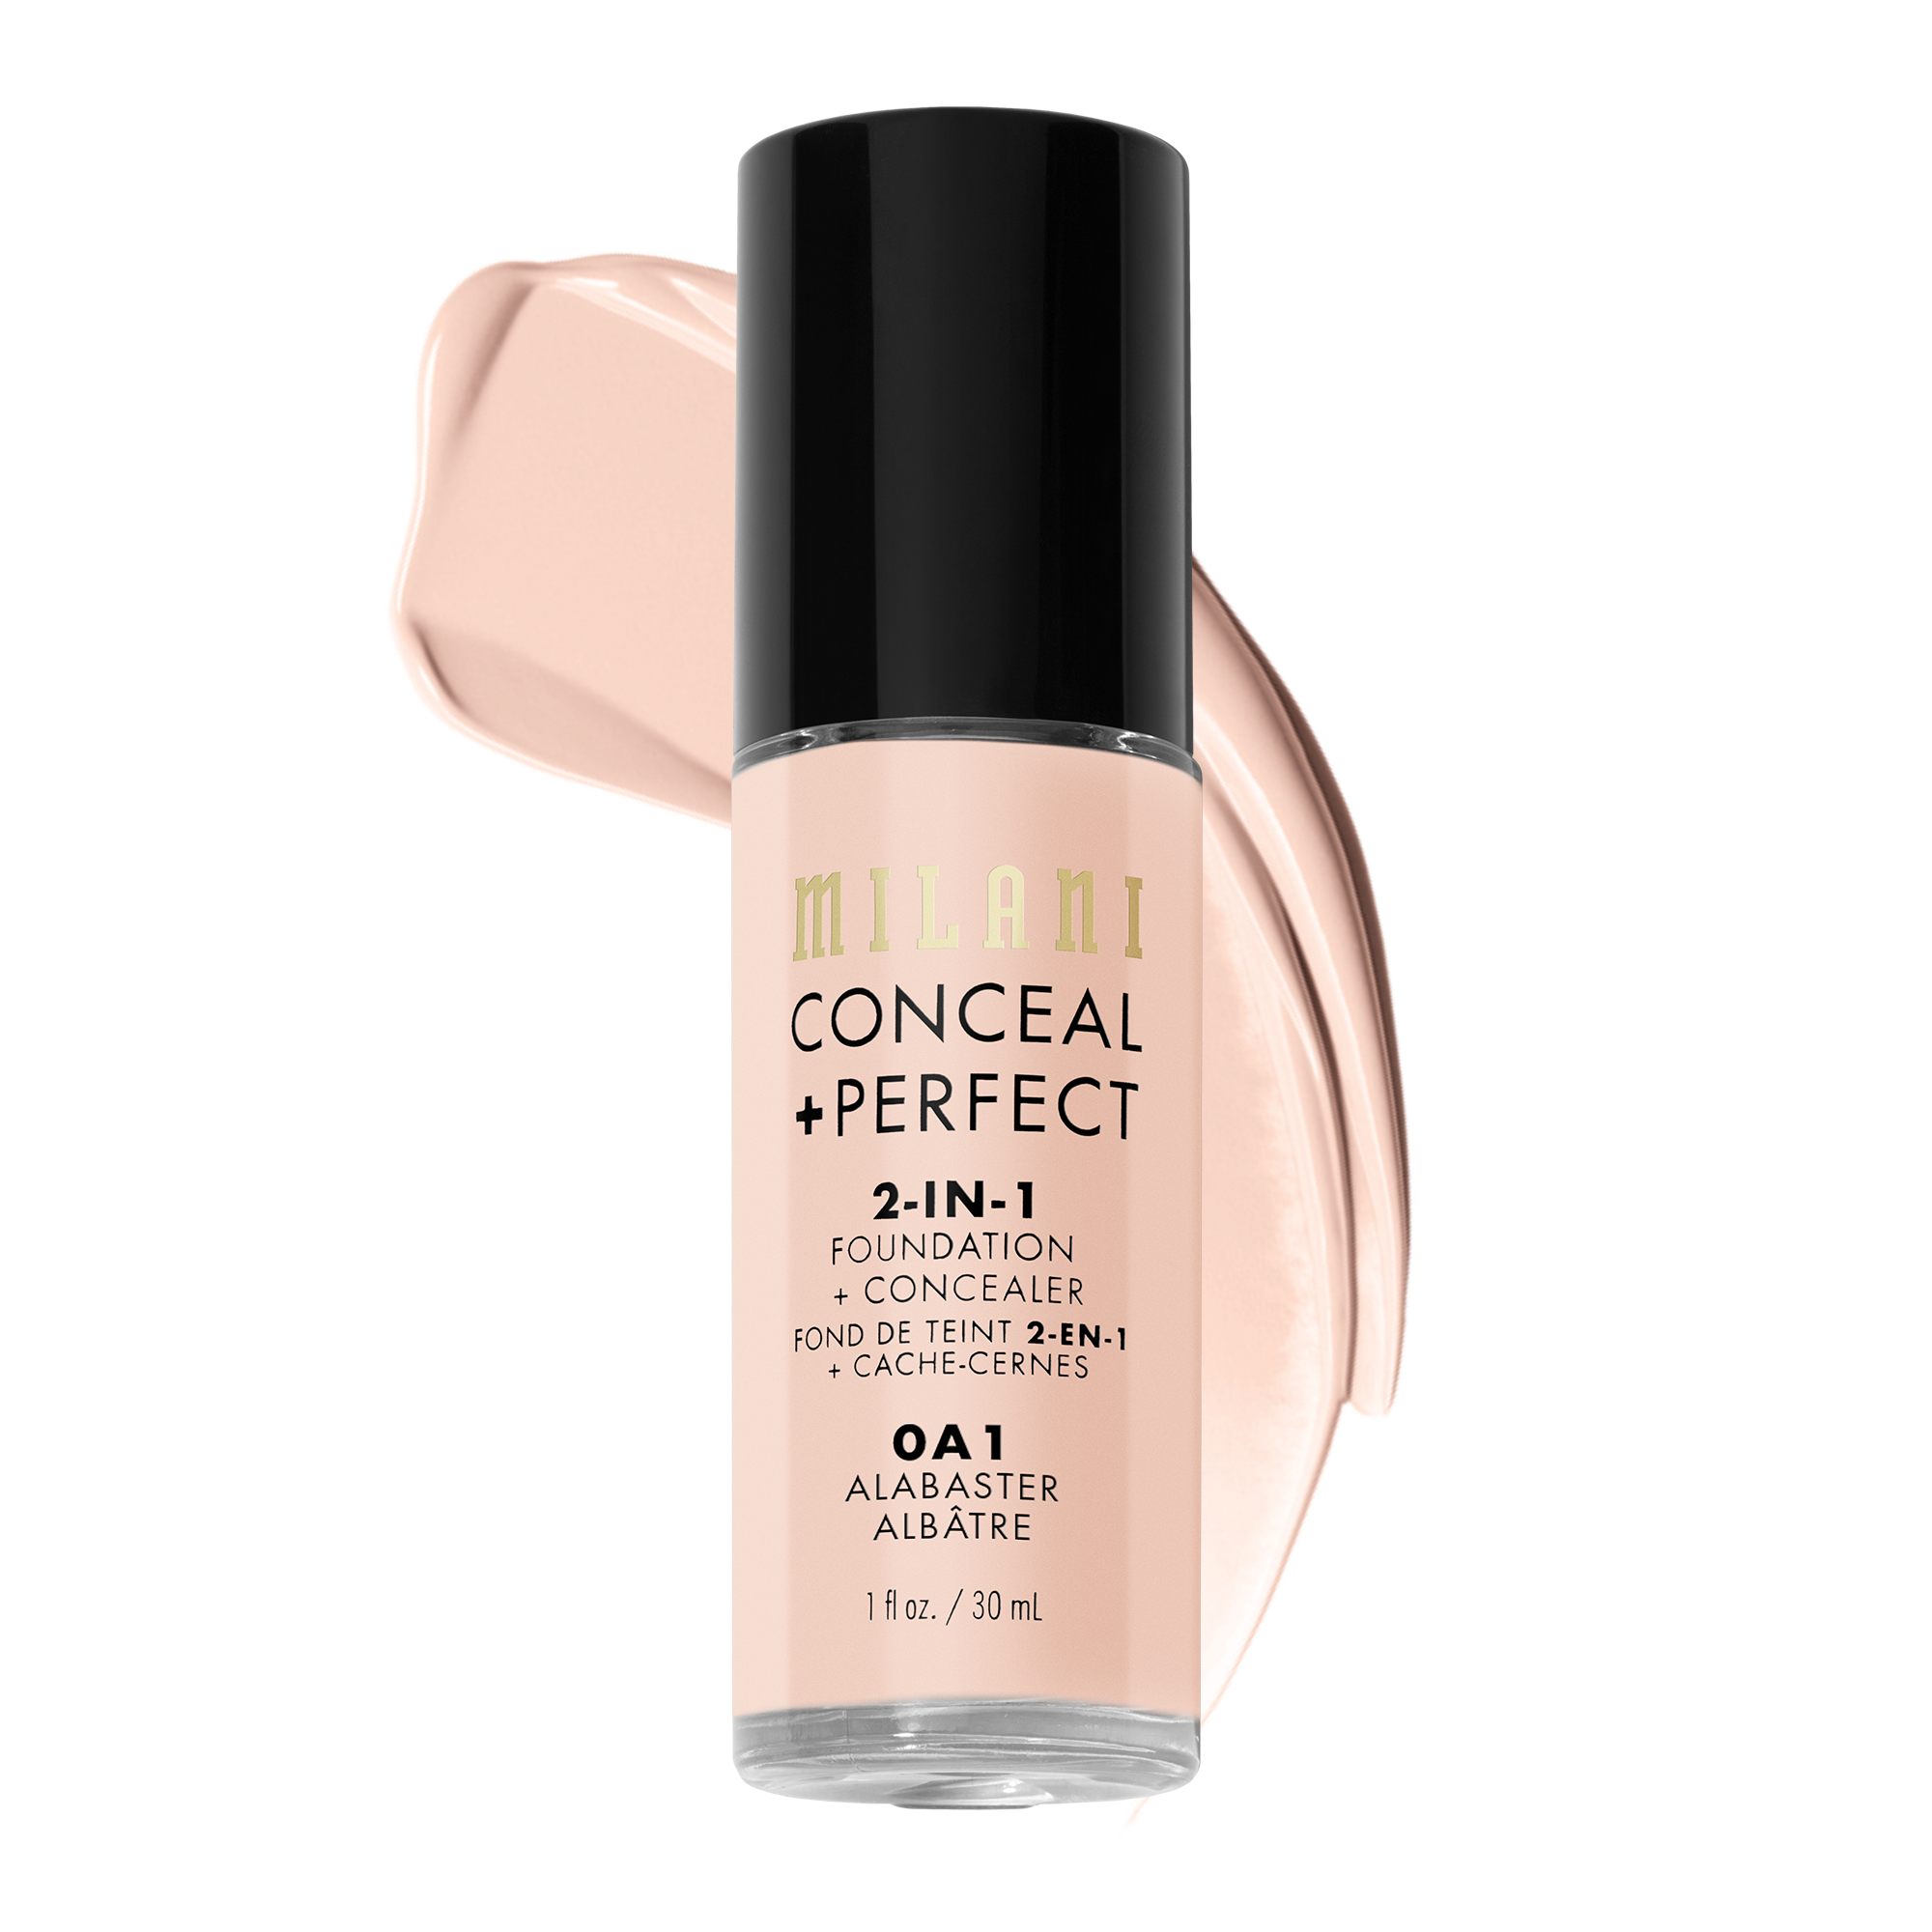 vinge egoisme lomme Conceal + Perfect 2-In-1 Foundation and Concealer | Milani Cosmetics